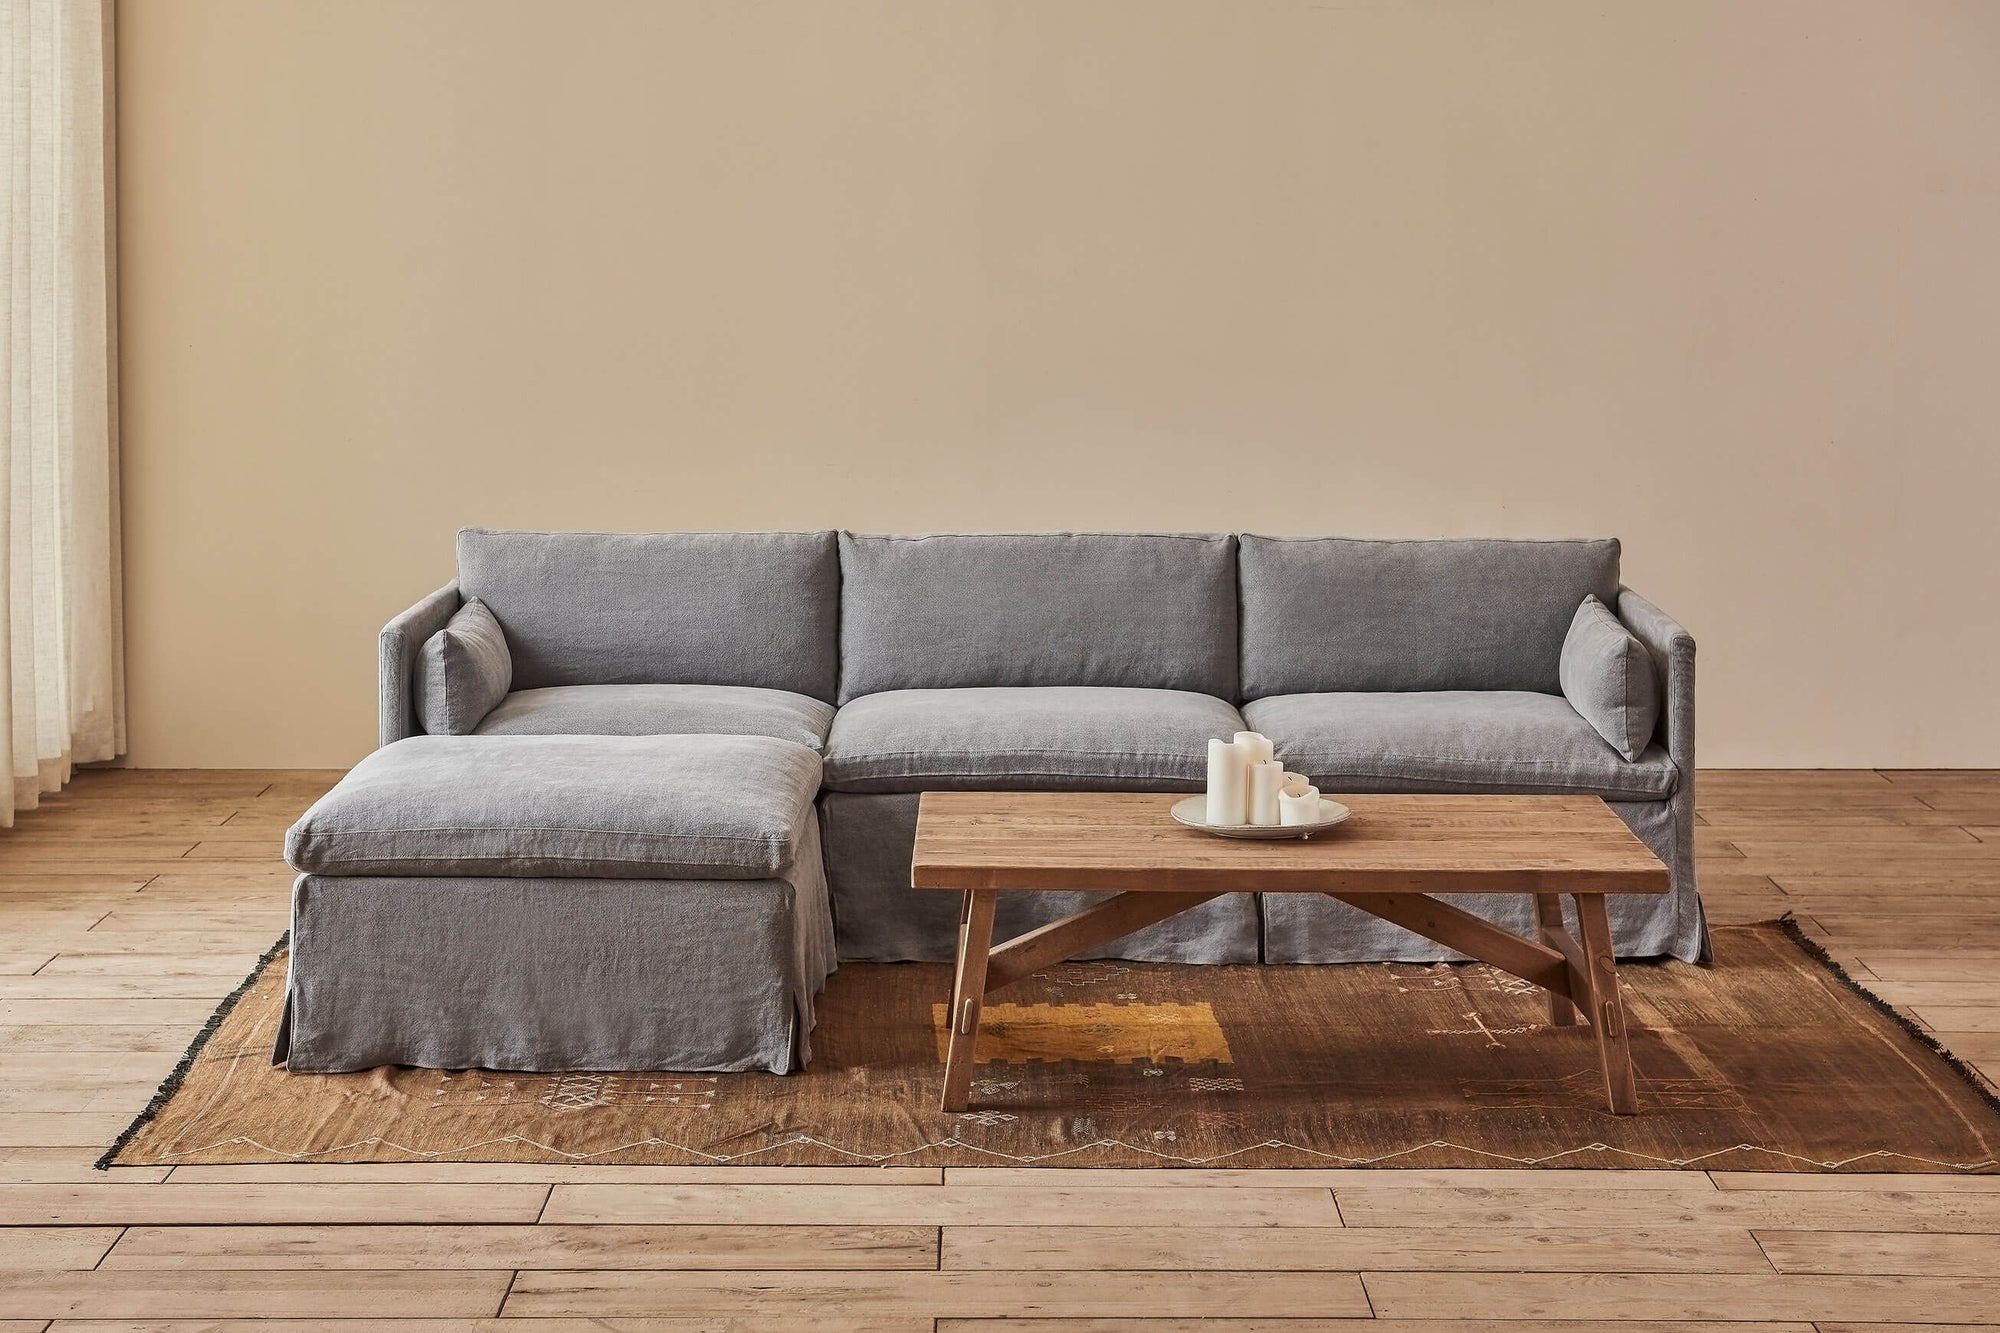 Gabriel 4-piece Chaise Sectional Sofa in Ink Cap, a medium cool grey Light Weight Linen, placed in a bright room beside a coffee table